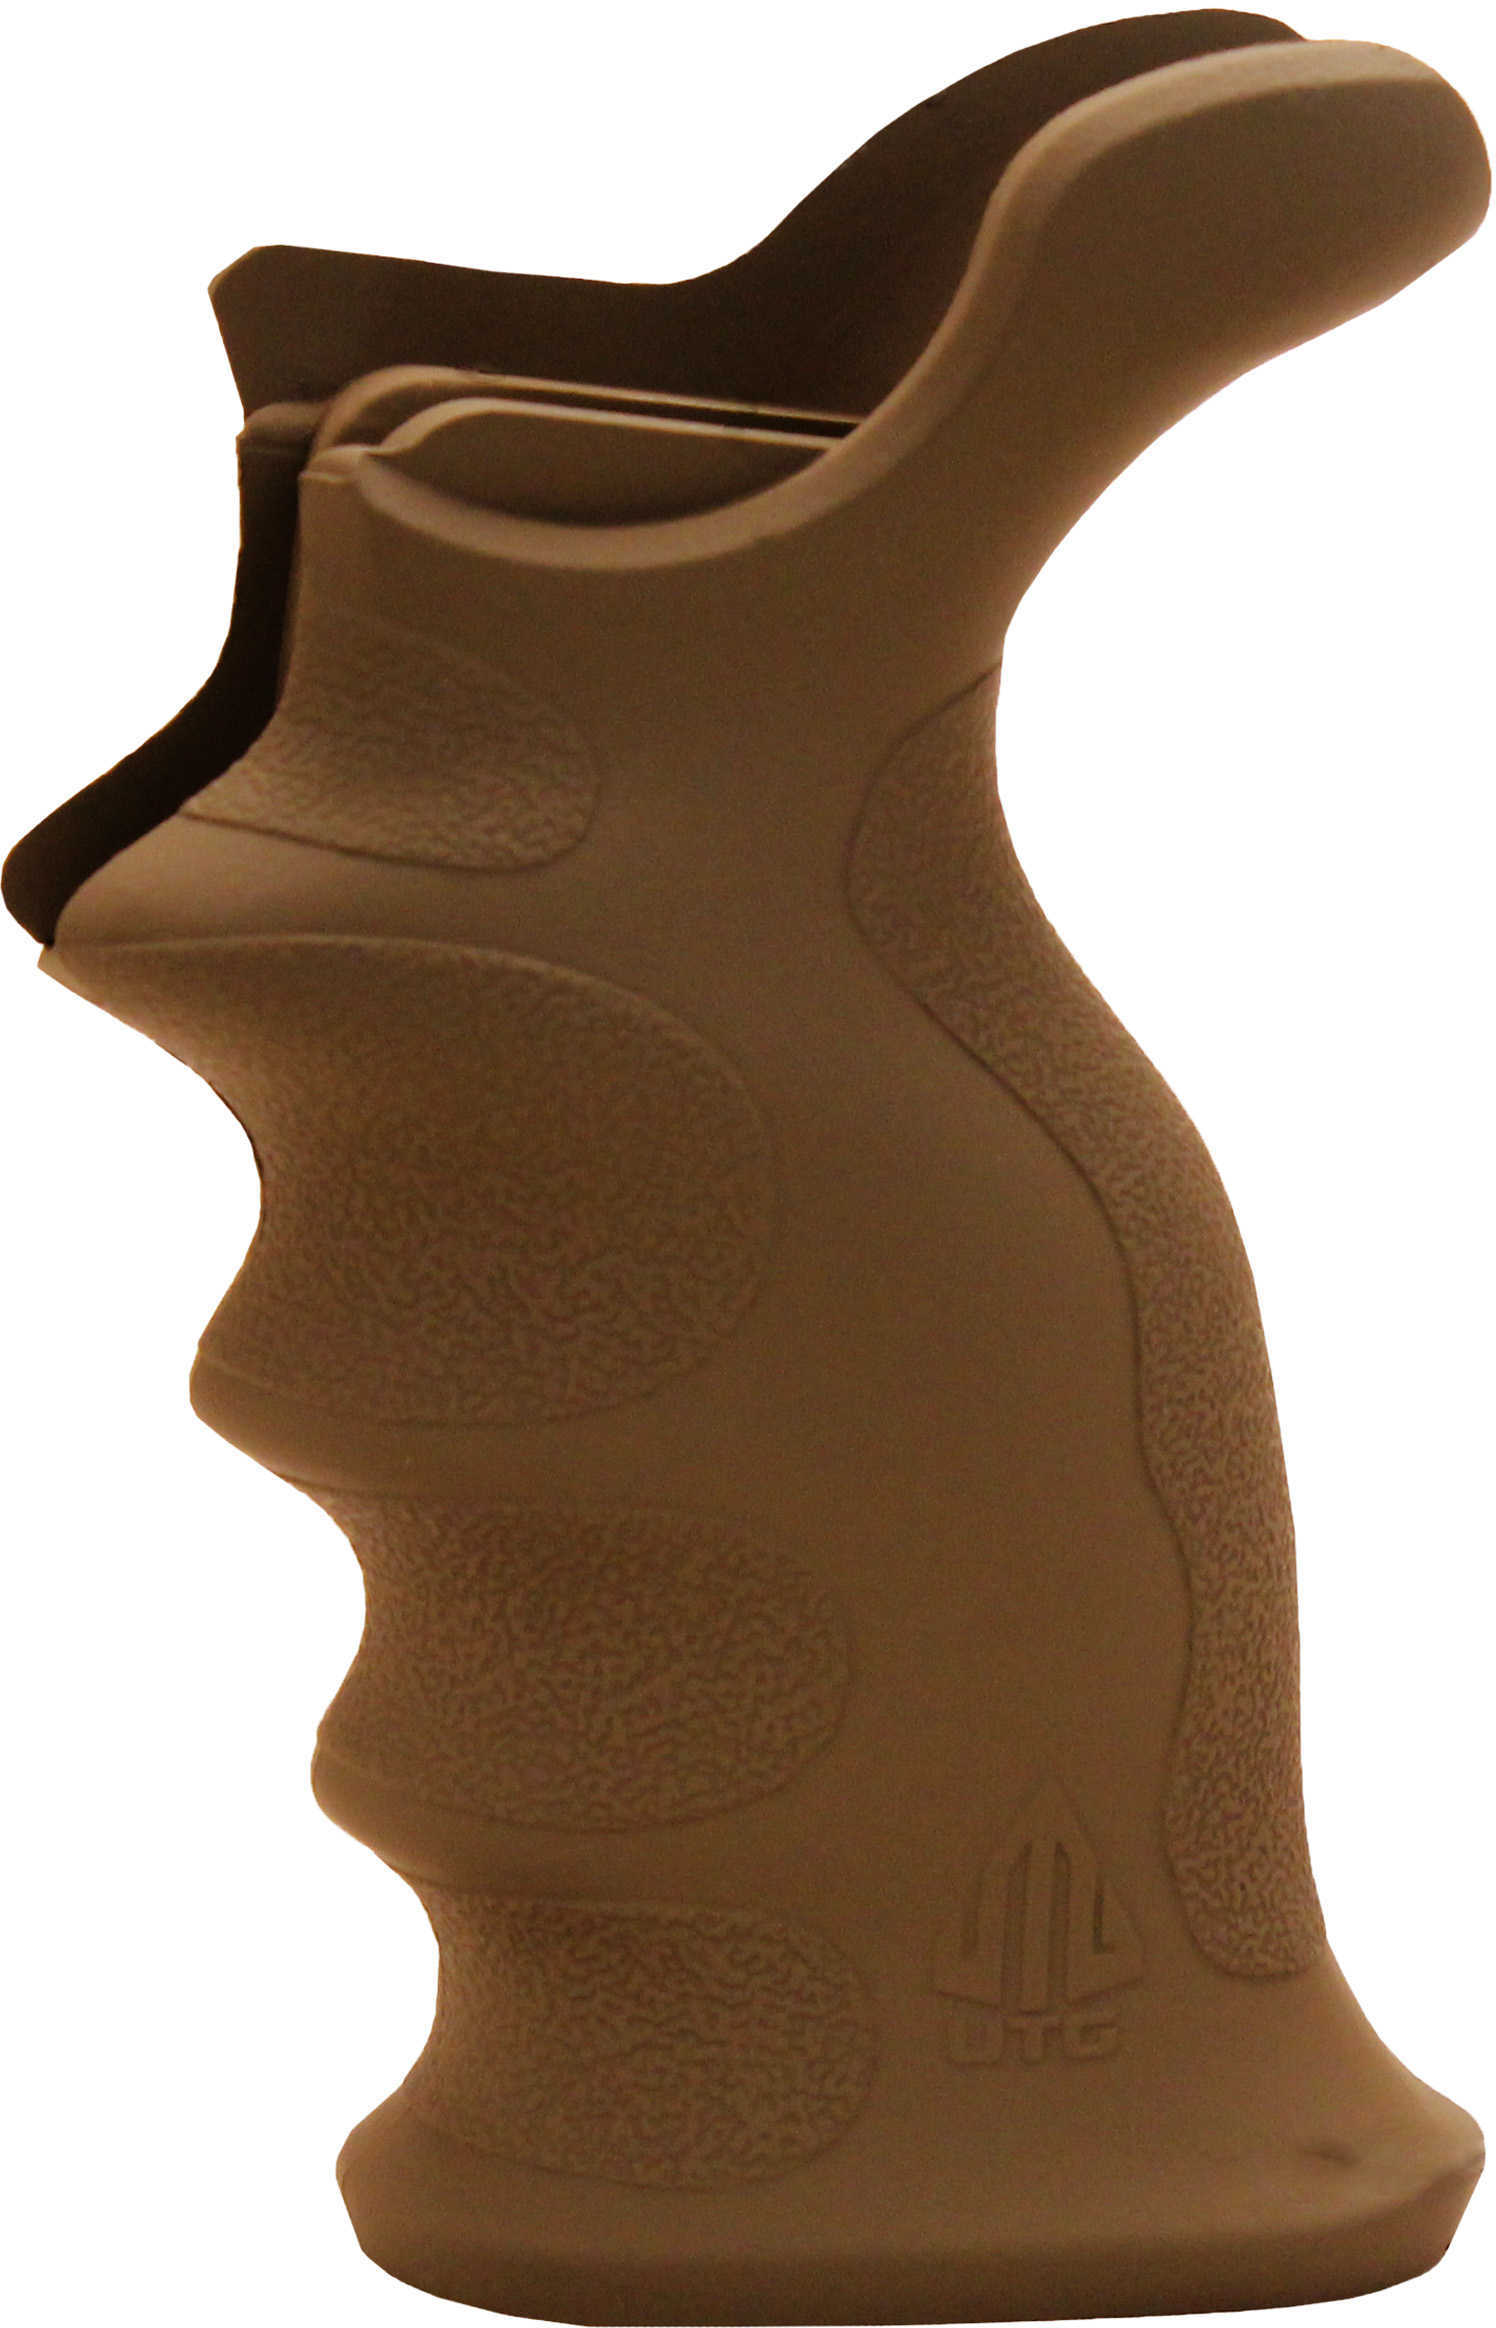 Leapers Inc. - UTG Model 4 Combat Sniper Pistol Grip Fits AR-15/M16 Contoured Finger Grooves with Storage Compartment Fl